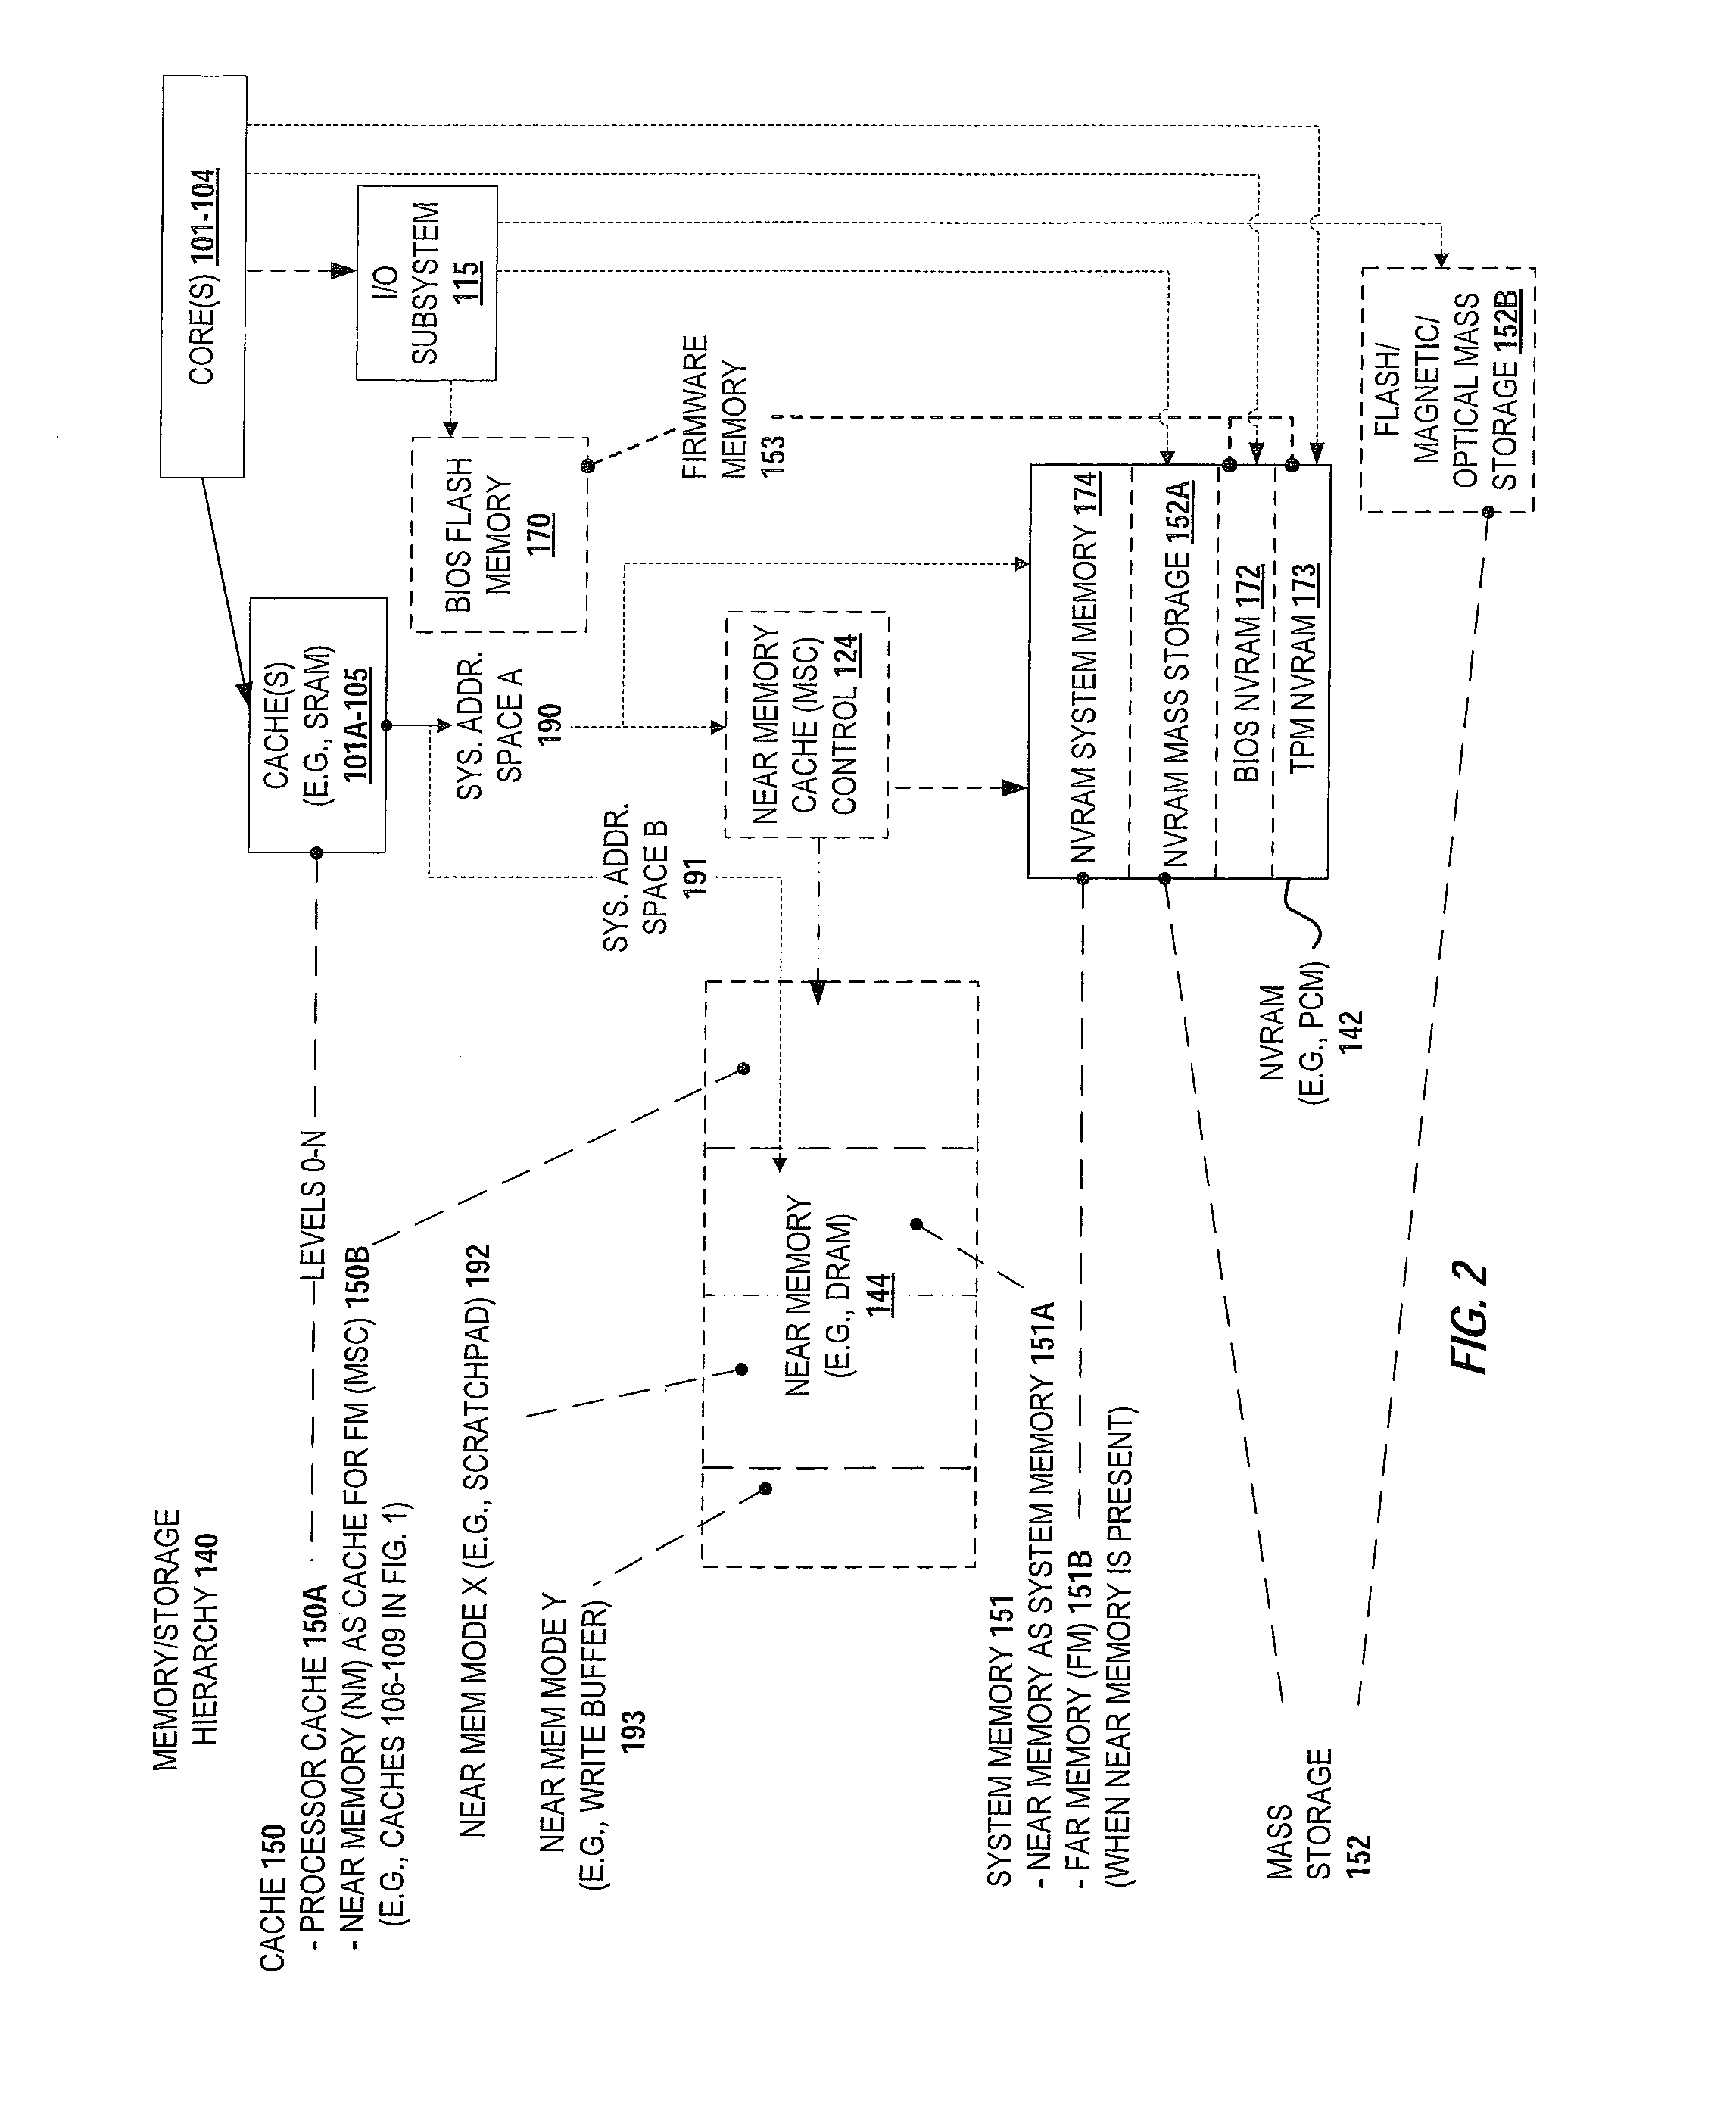 Apparatus and method for implementing a multi-level memory hierarchy having different operating modes